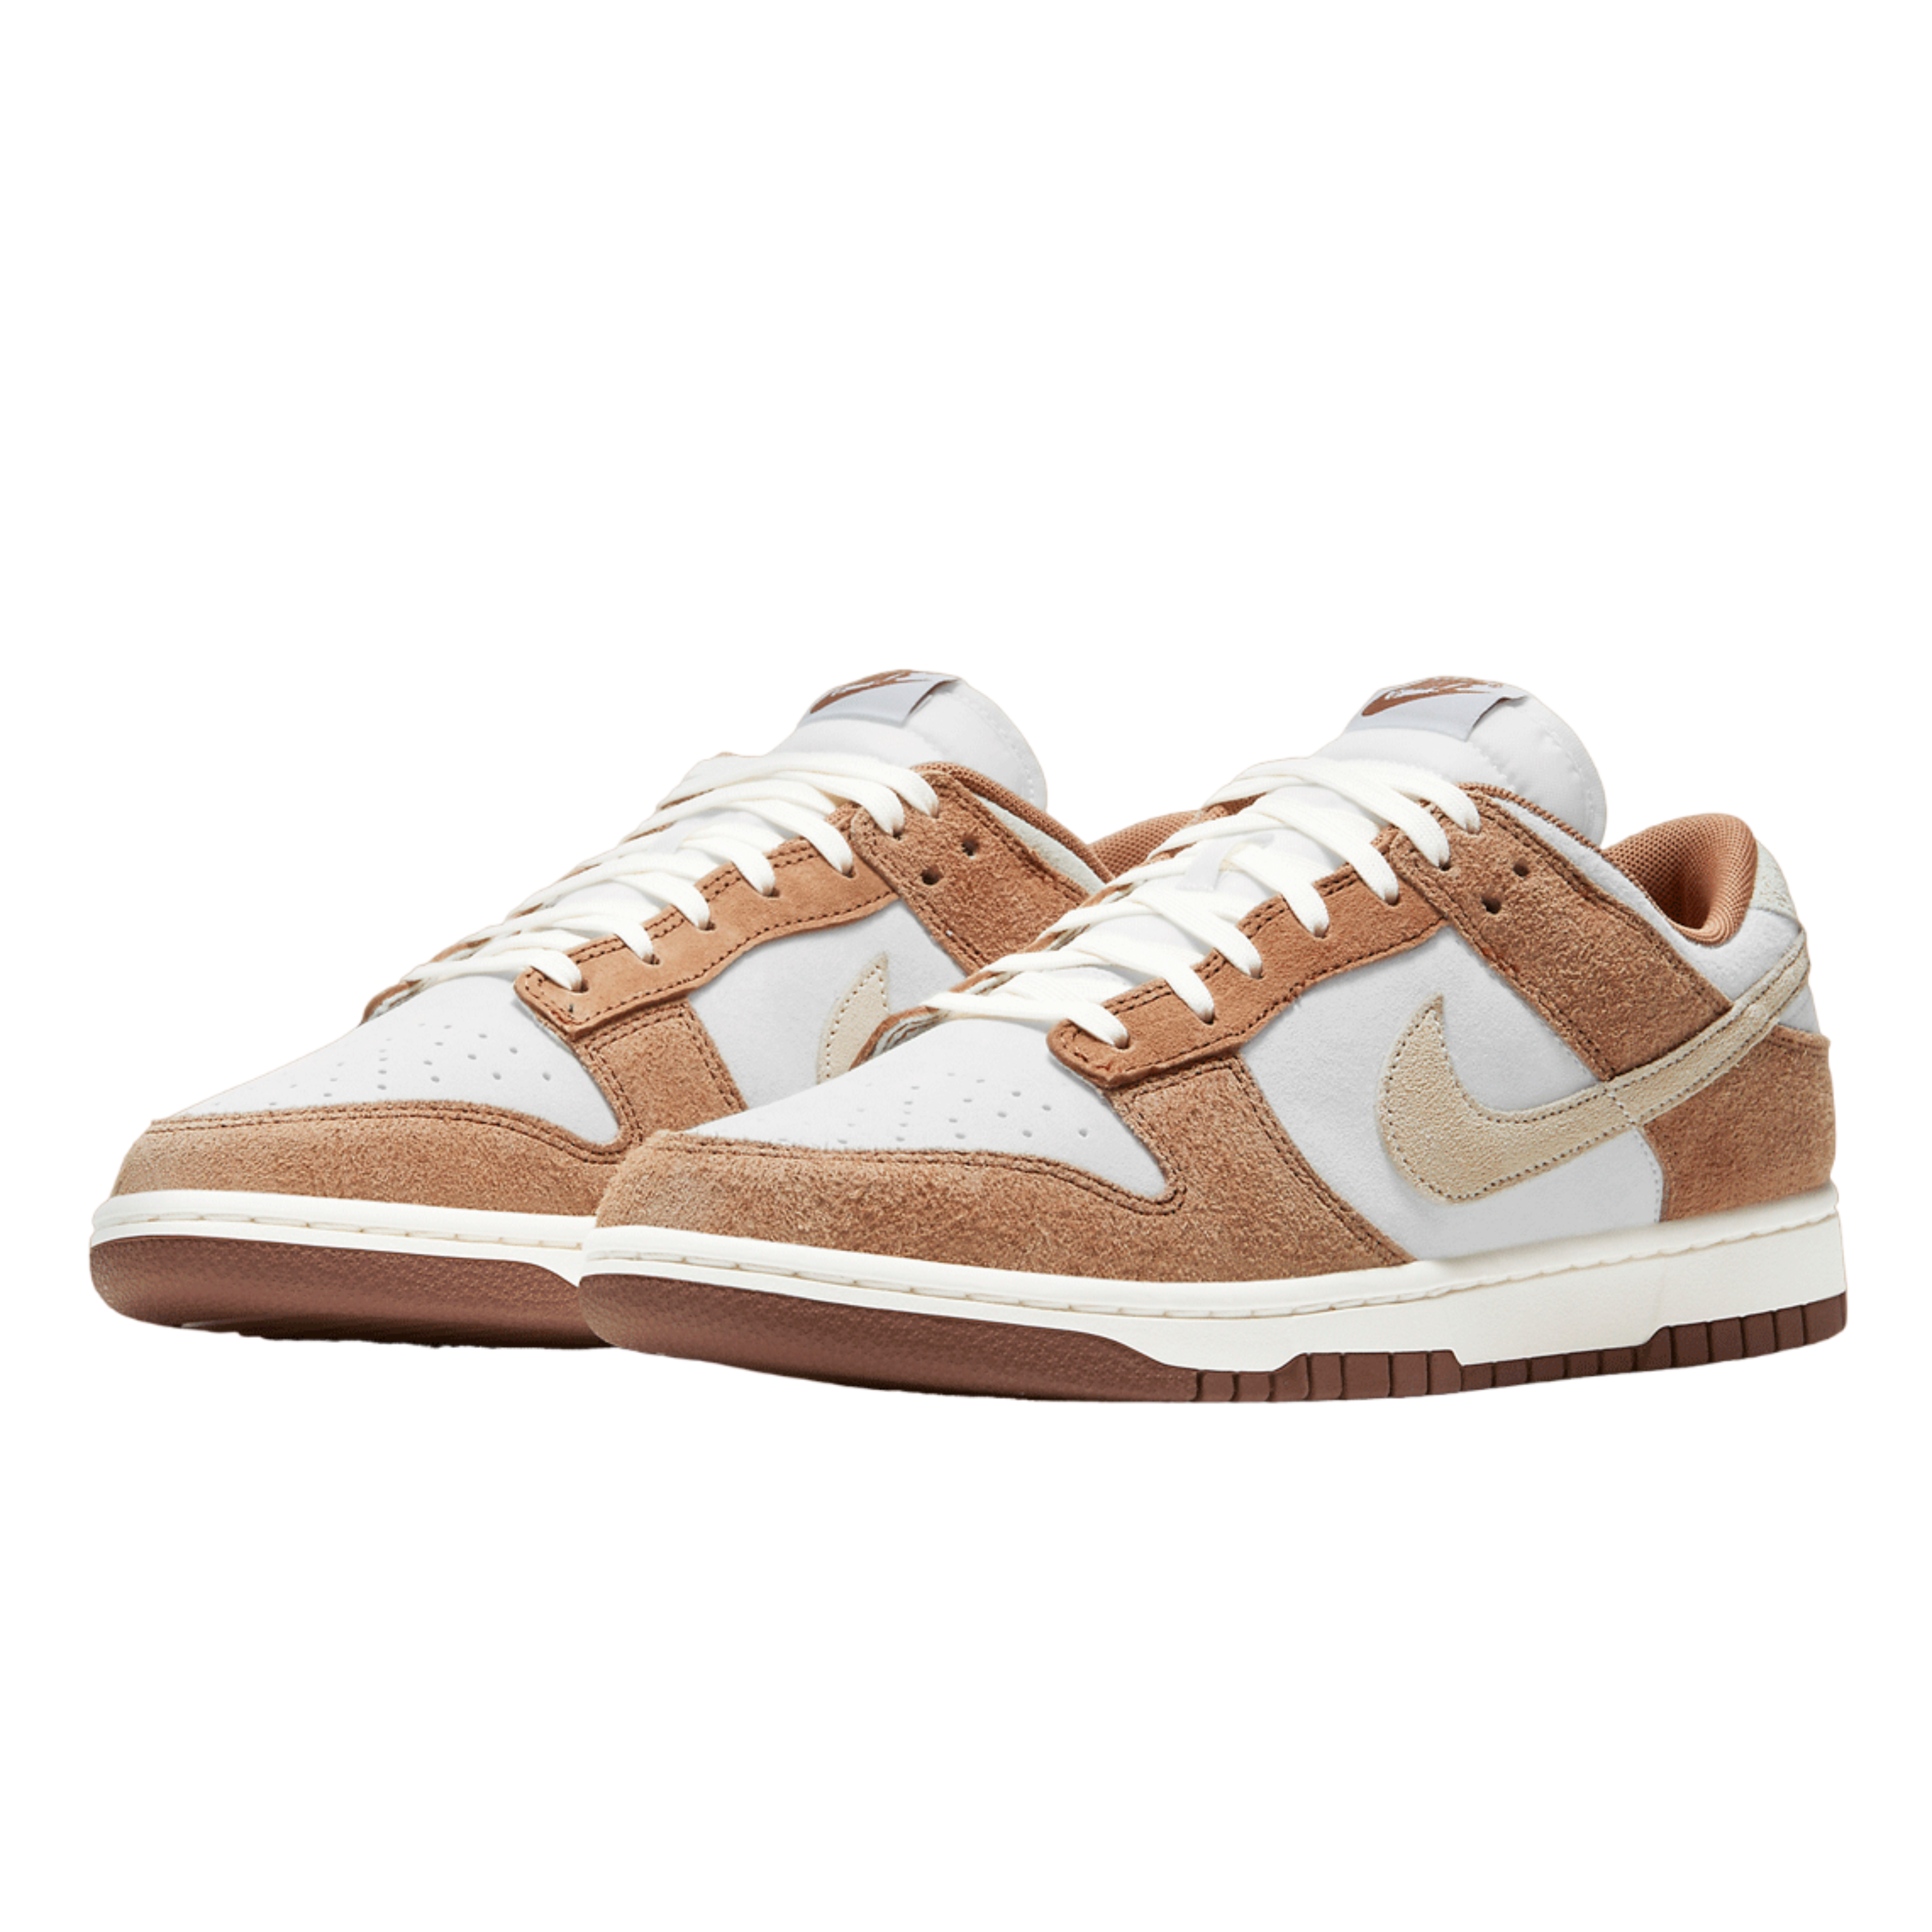 Nike Dunk Low 'Medium Curry' - Vaquette Sneakers